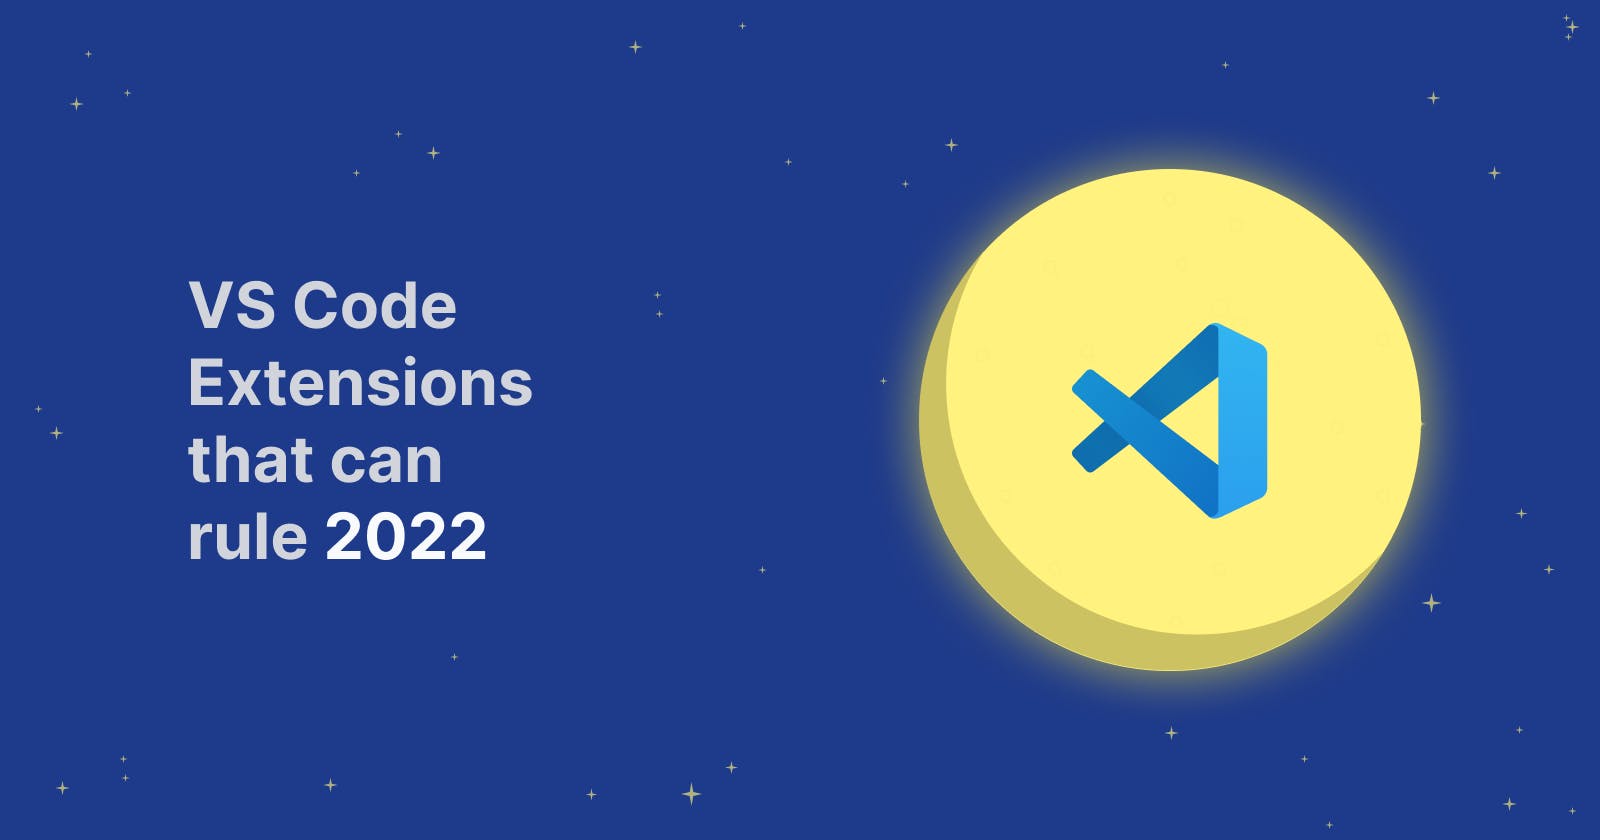 VS Code Extensions that can rule 2022